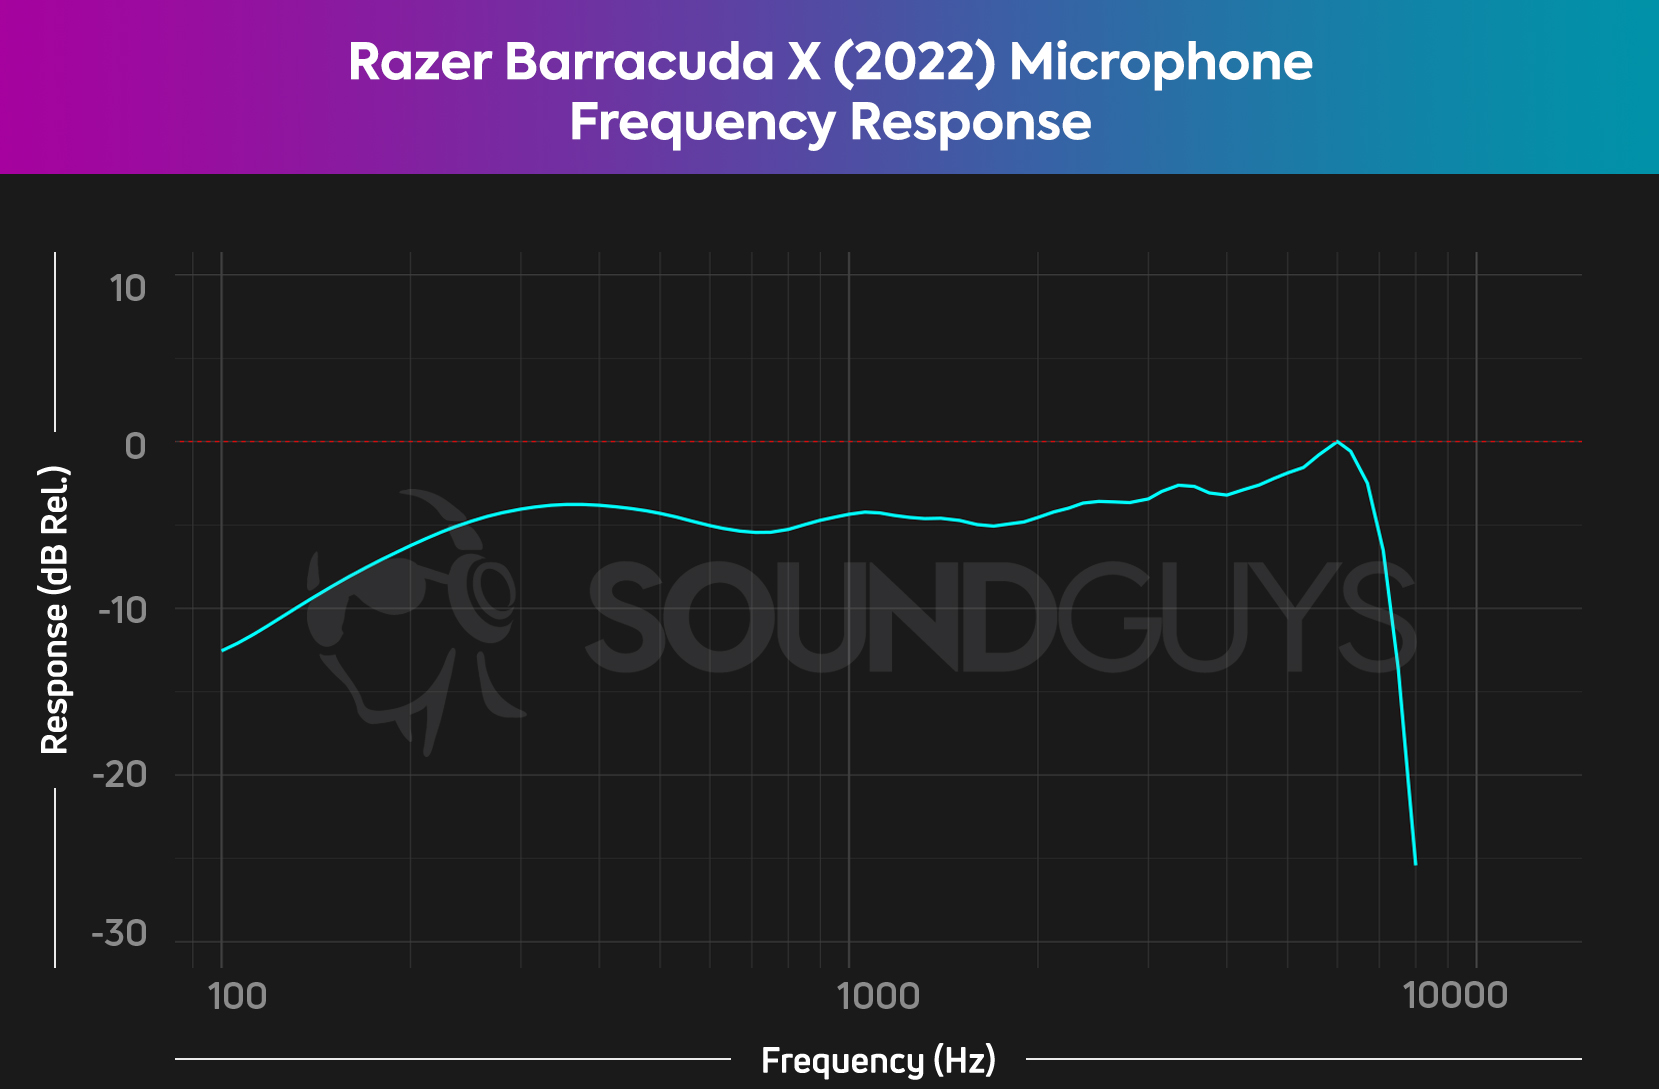 The microphone frequency response chart for the Razer Barracuda X (2022).